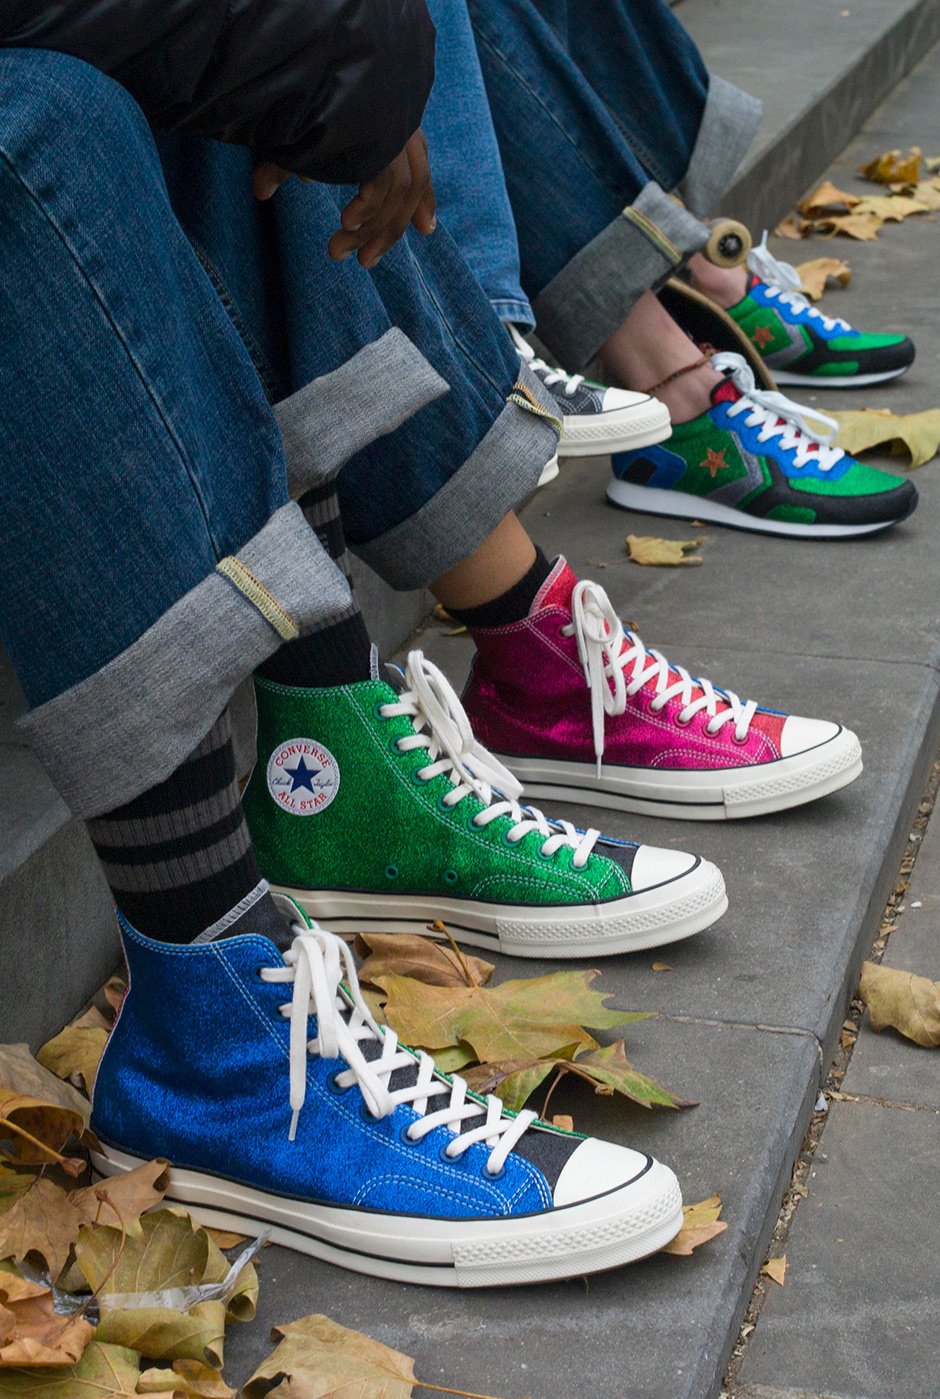 J.W. Anderson x Converse "Glitter Gutter" Collection